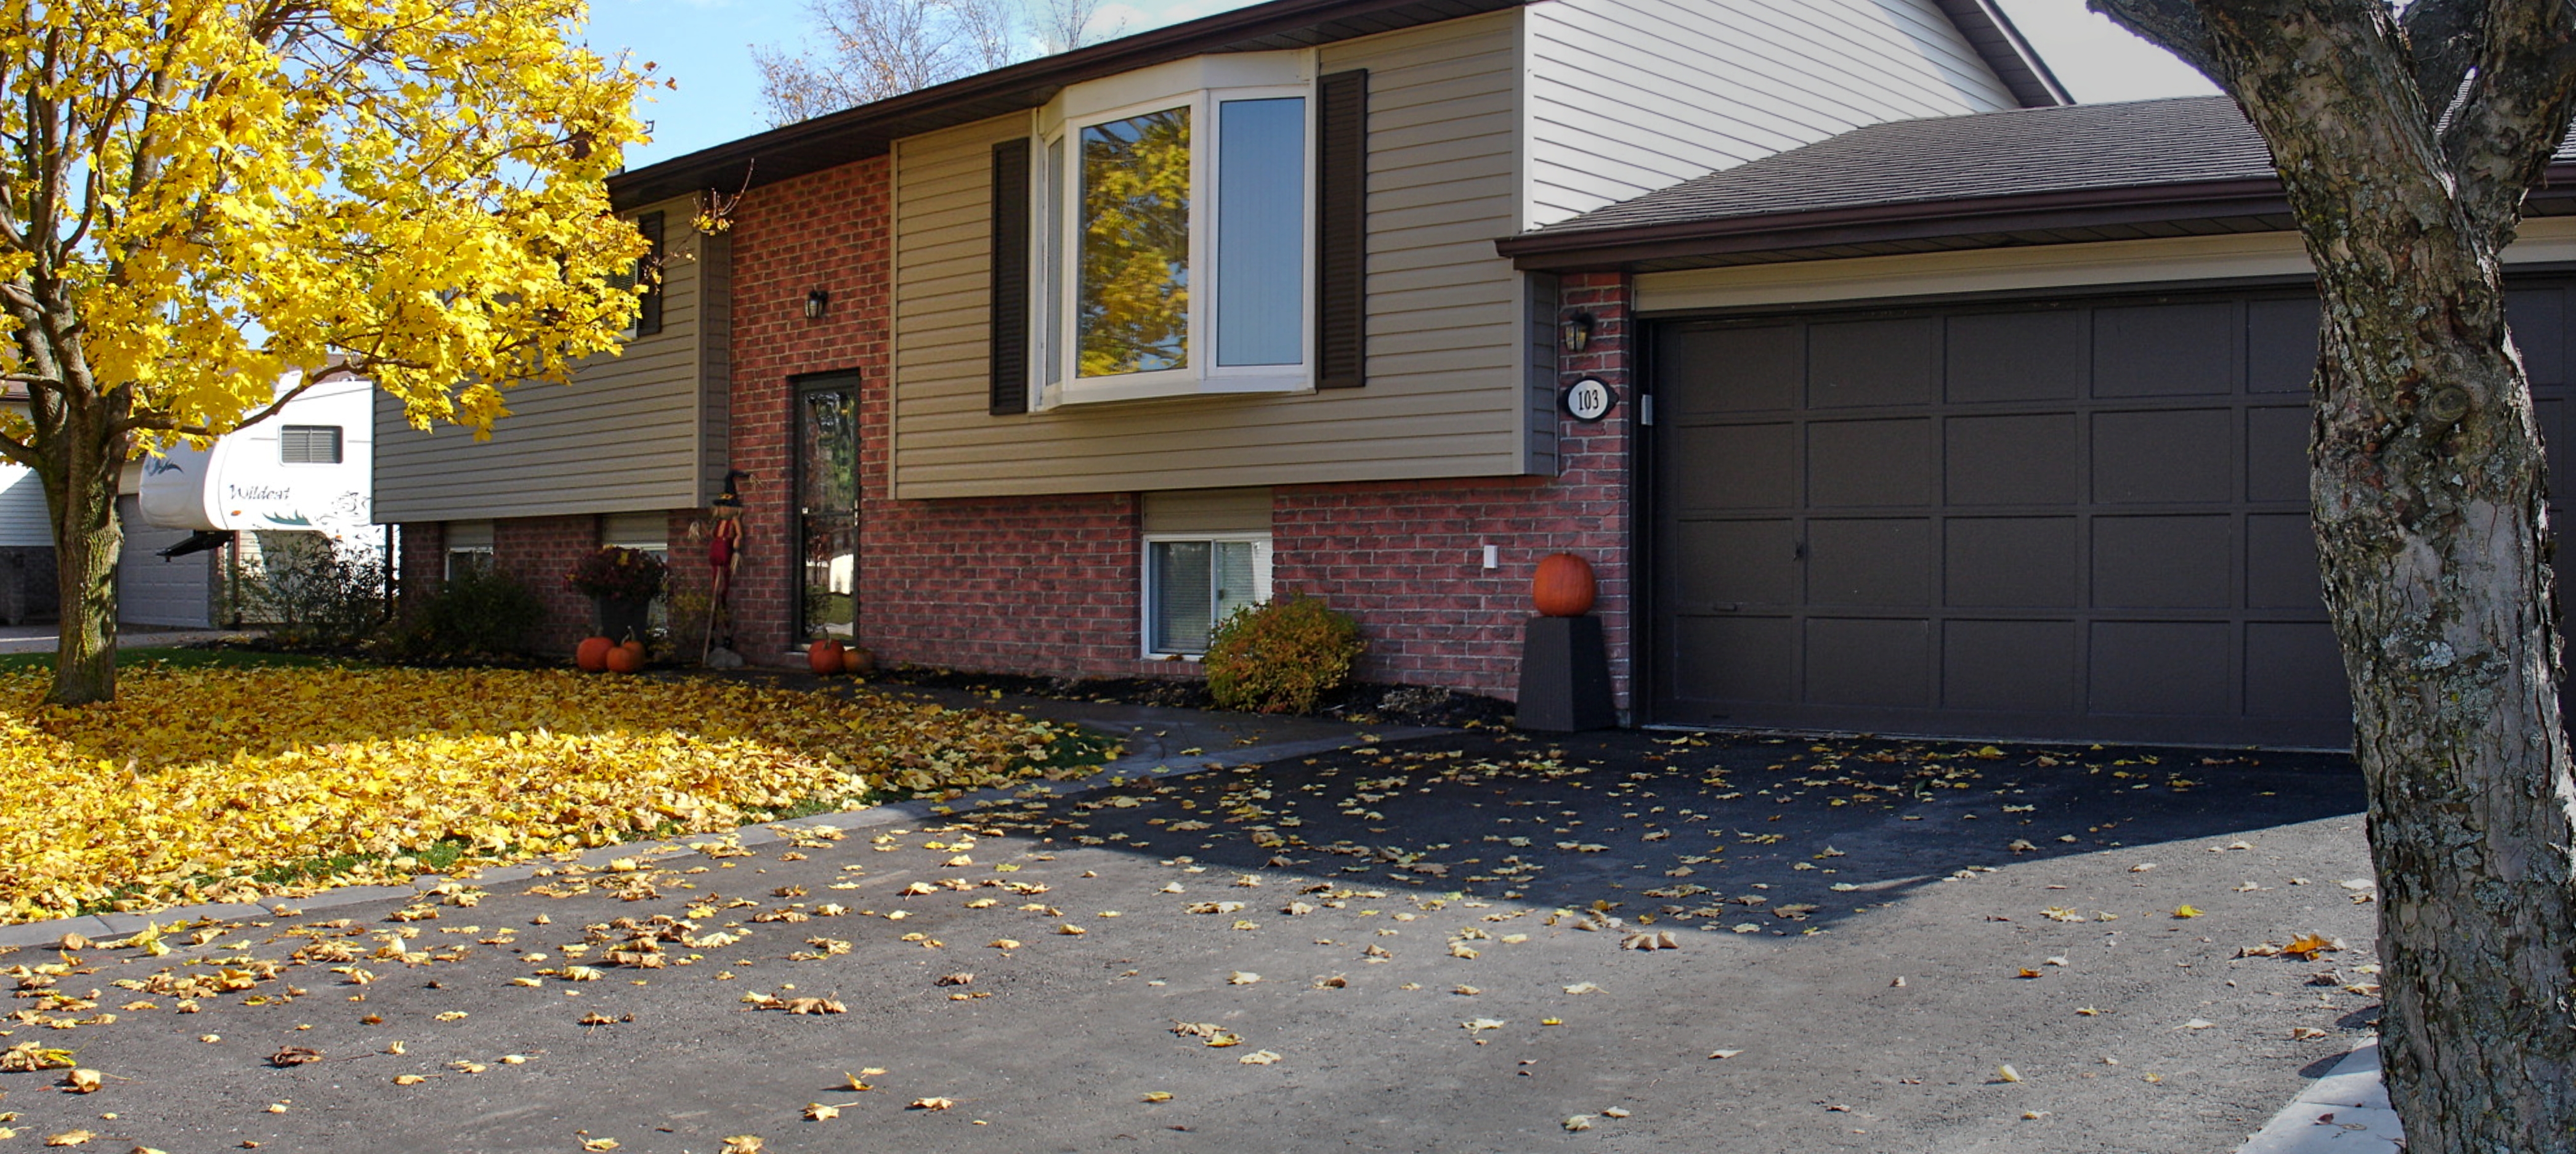 Raised bungalow for sale in Thornton | The Barrie Real Estate Blog